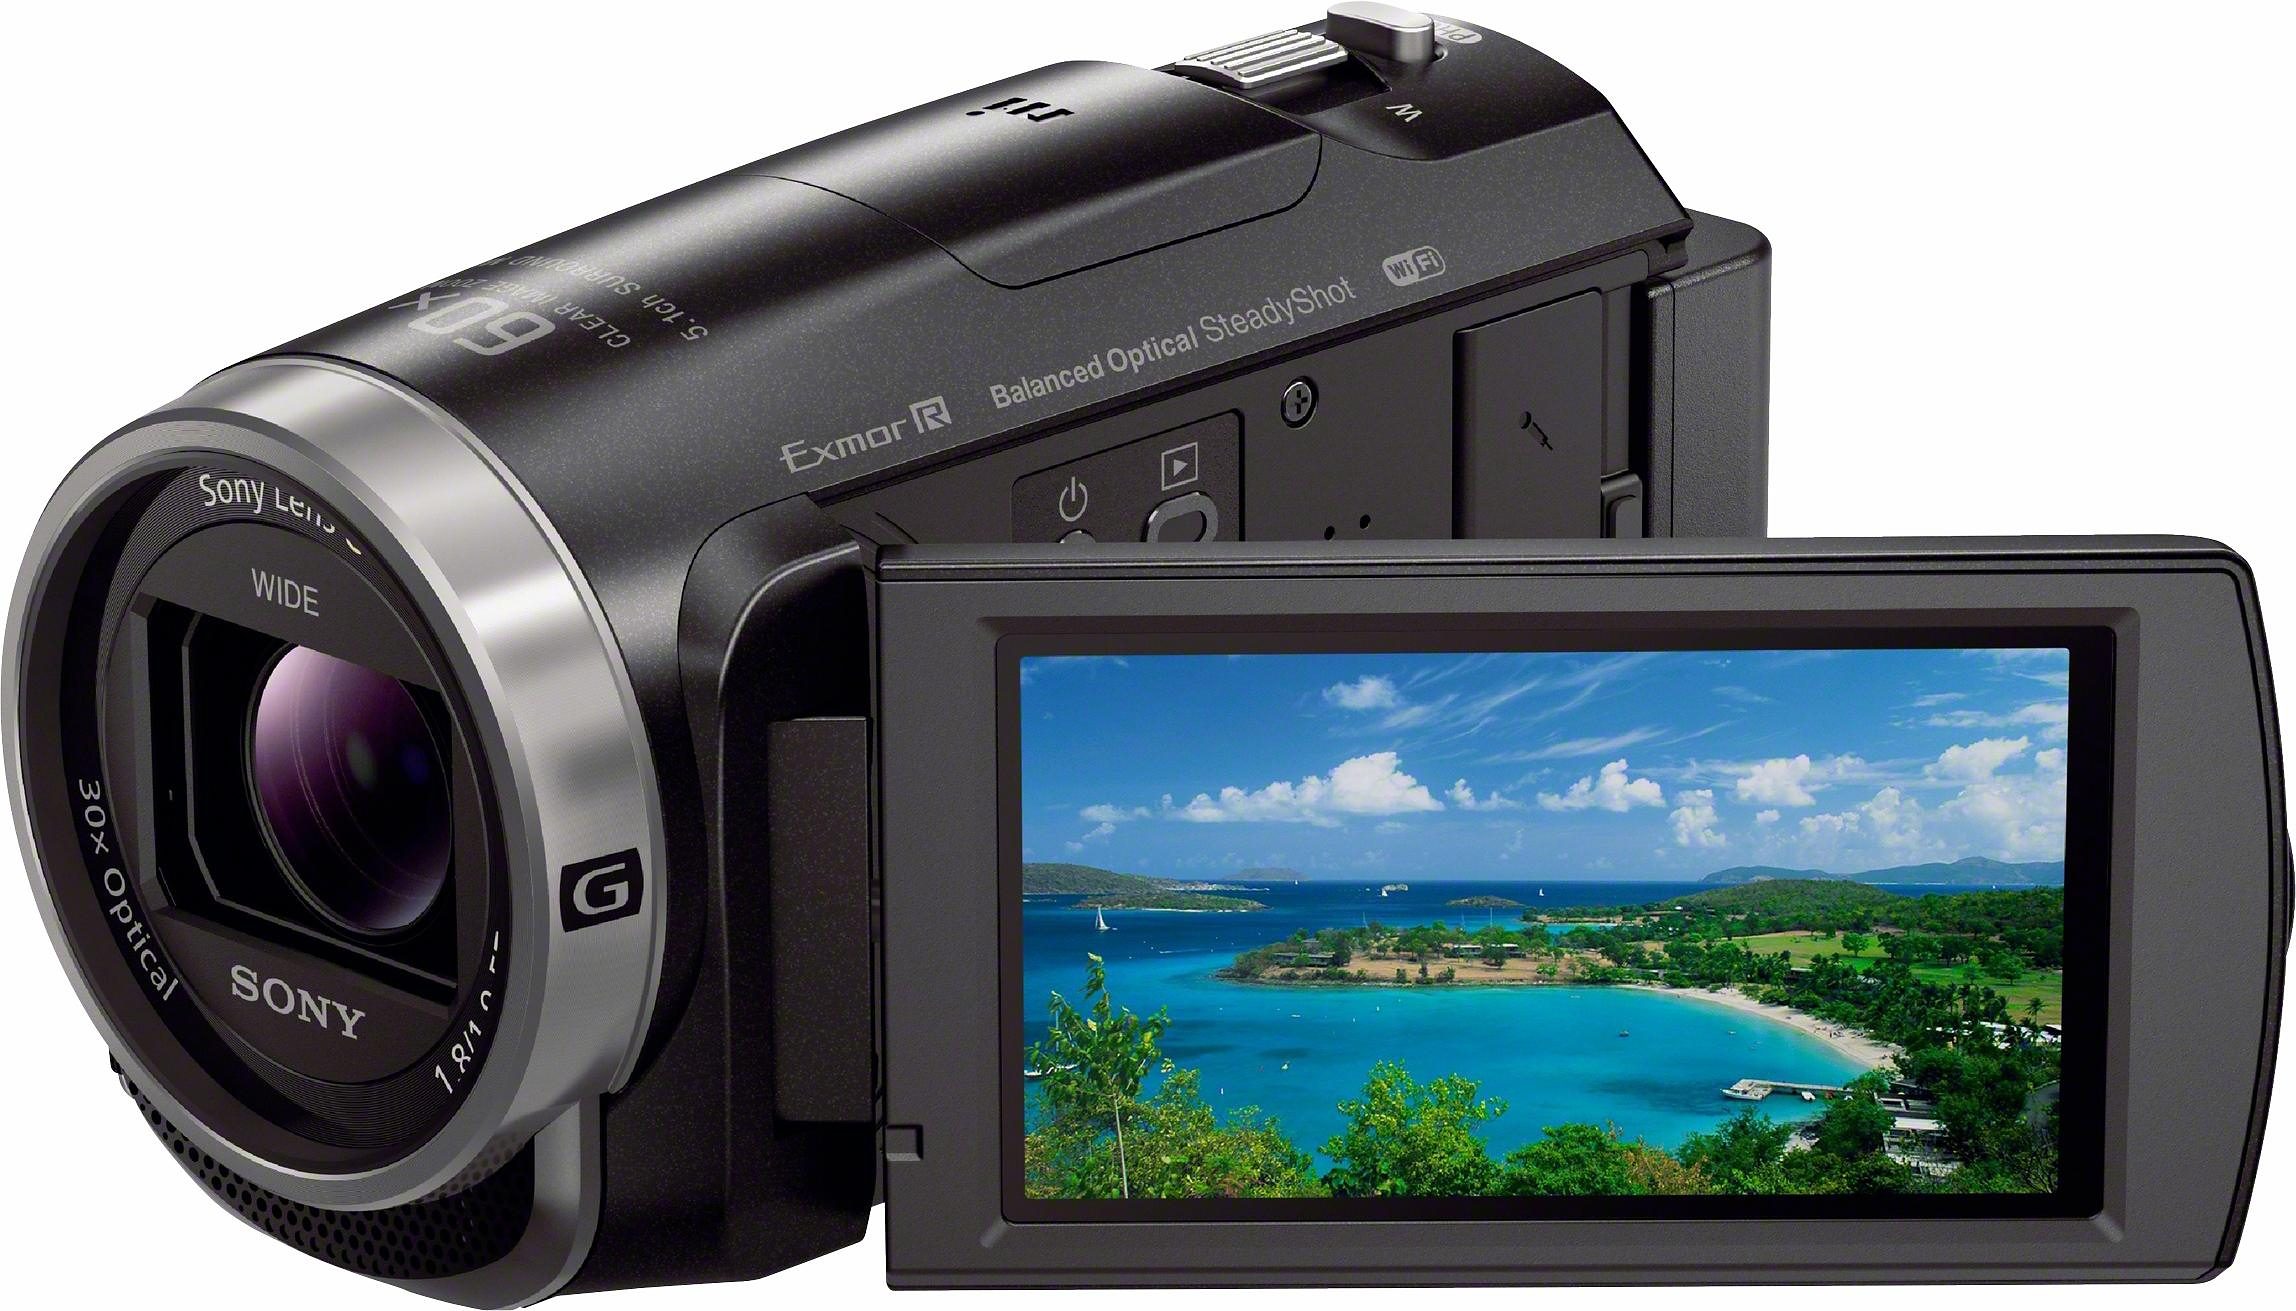 Sony »HDR-CX625B« Camcorder (Full HD, NFC, WLAN (Wi-Fi), 30x opt. Zoom, 26, 8mm Weitwinkel) online kaufen | OTTO